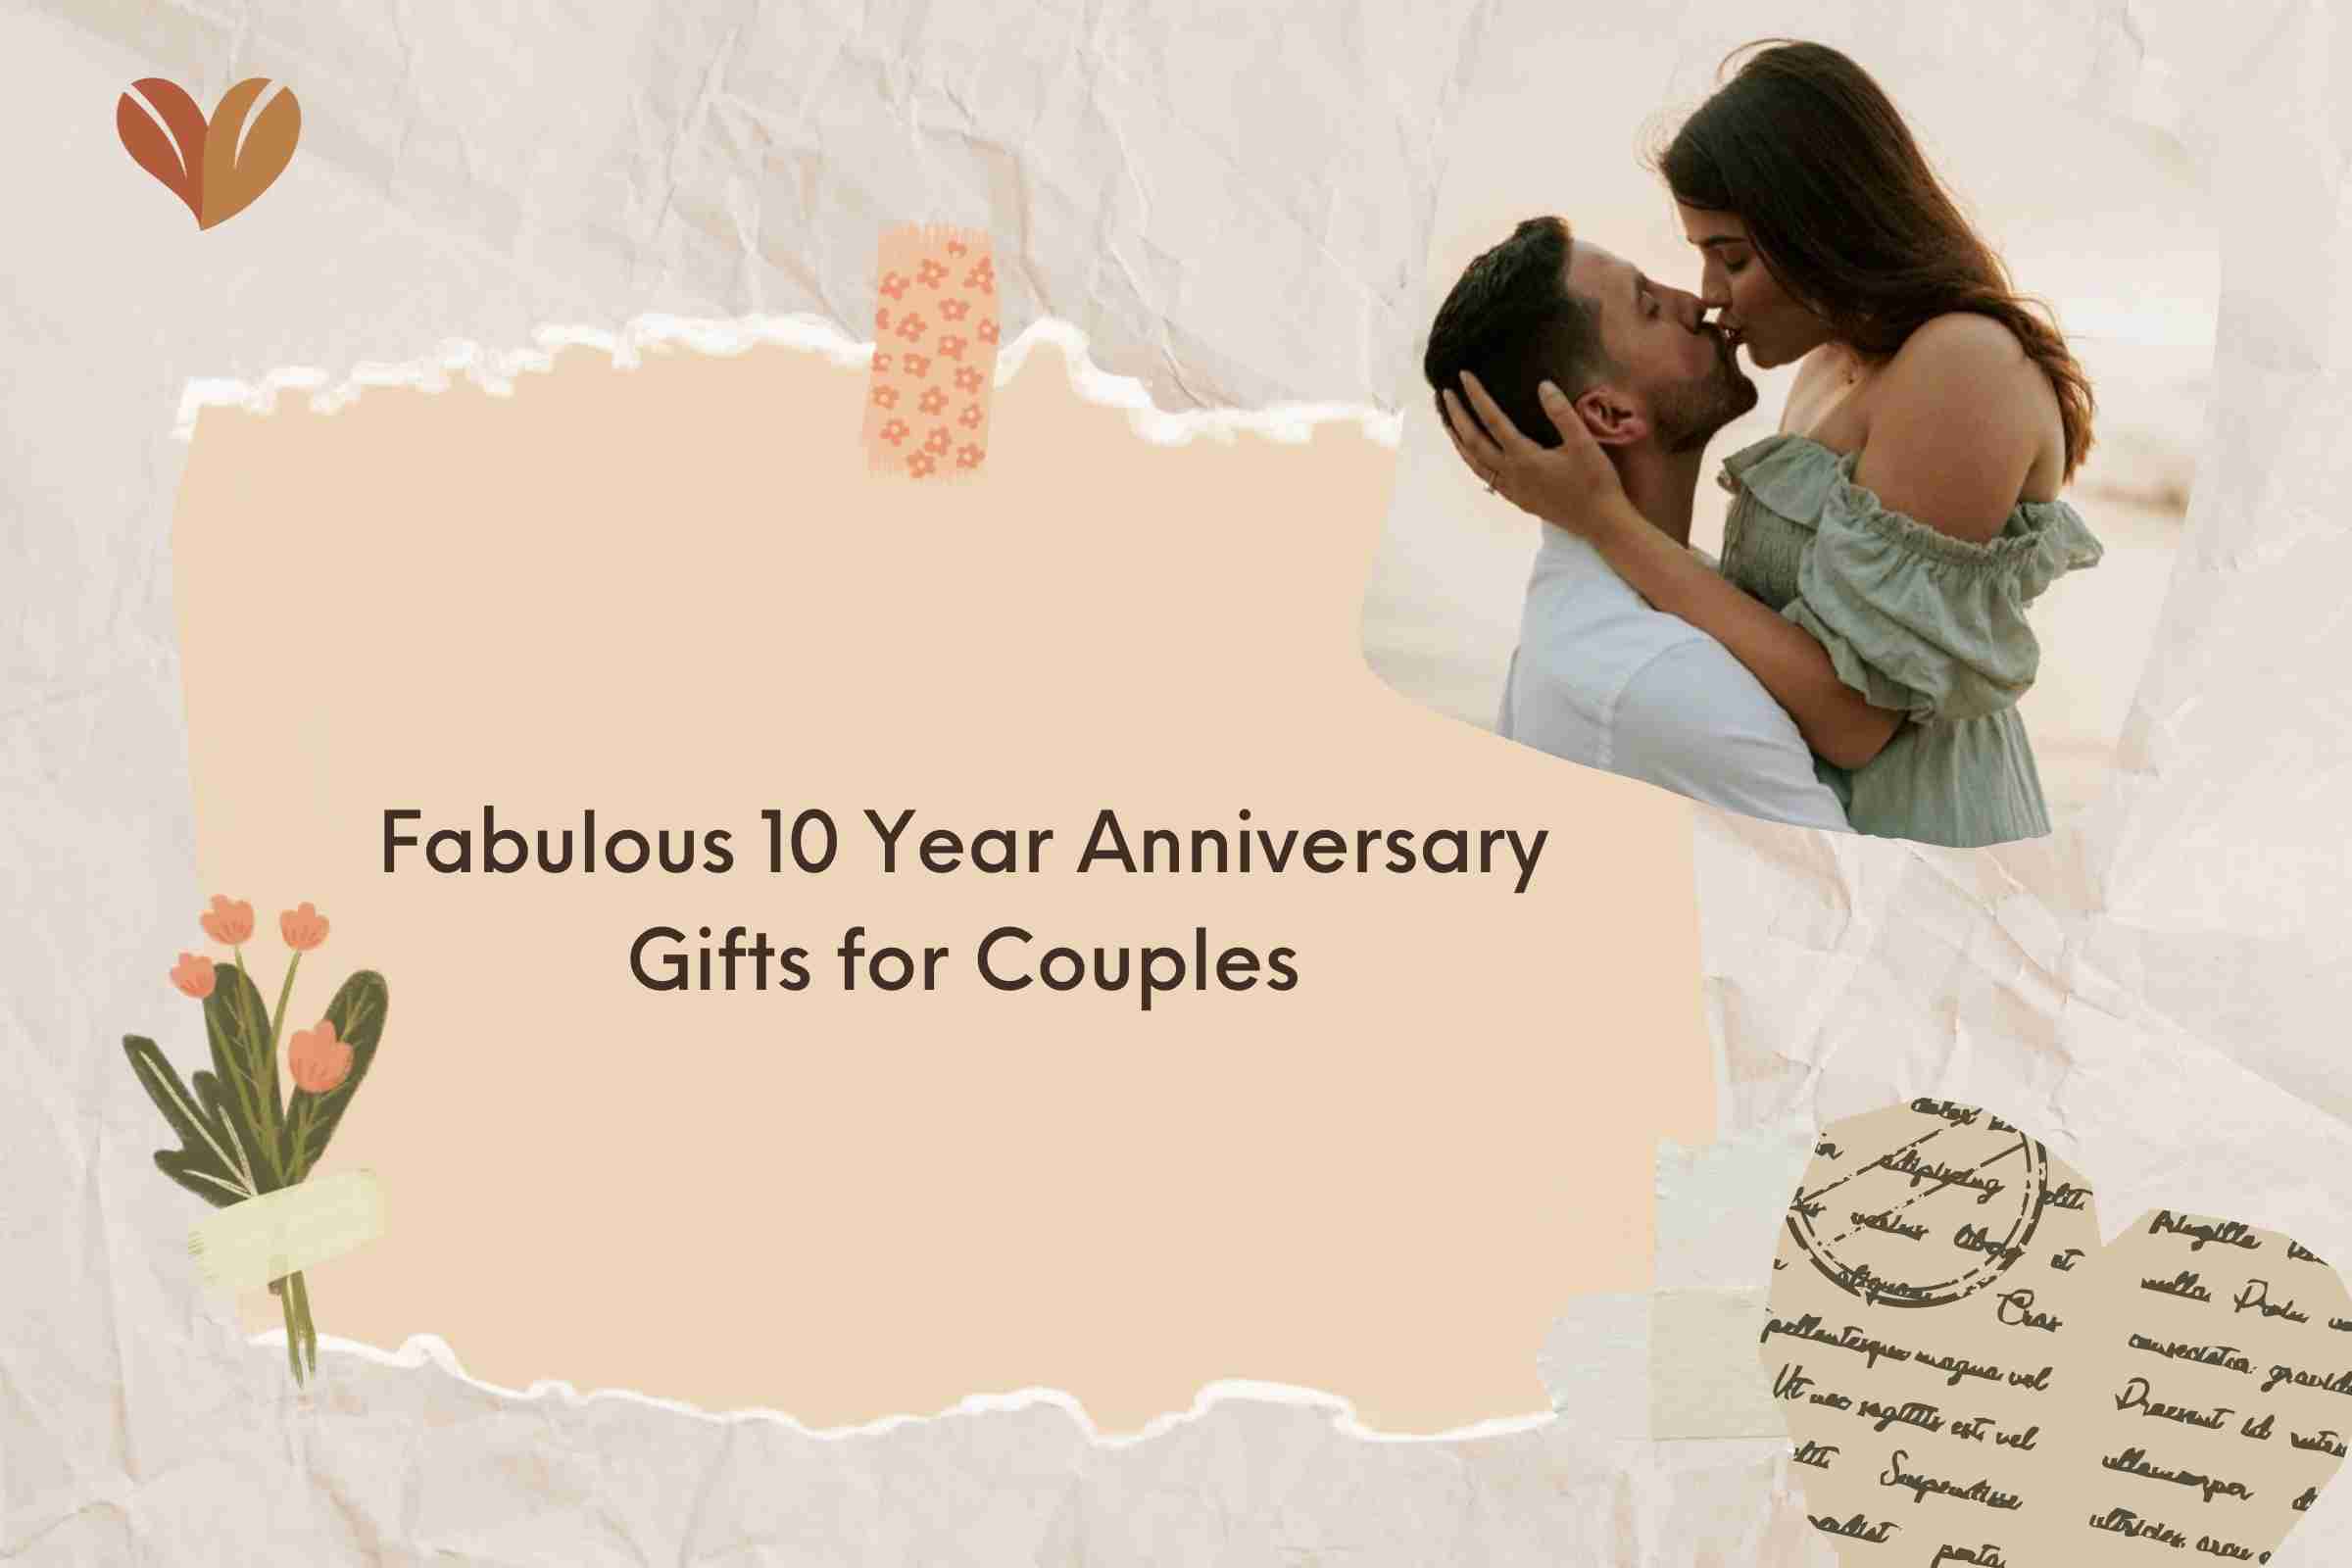 Fabulous 10 Year Anniversary Gifts for Couples